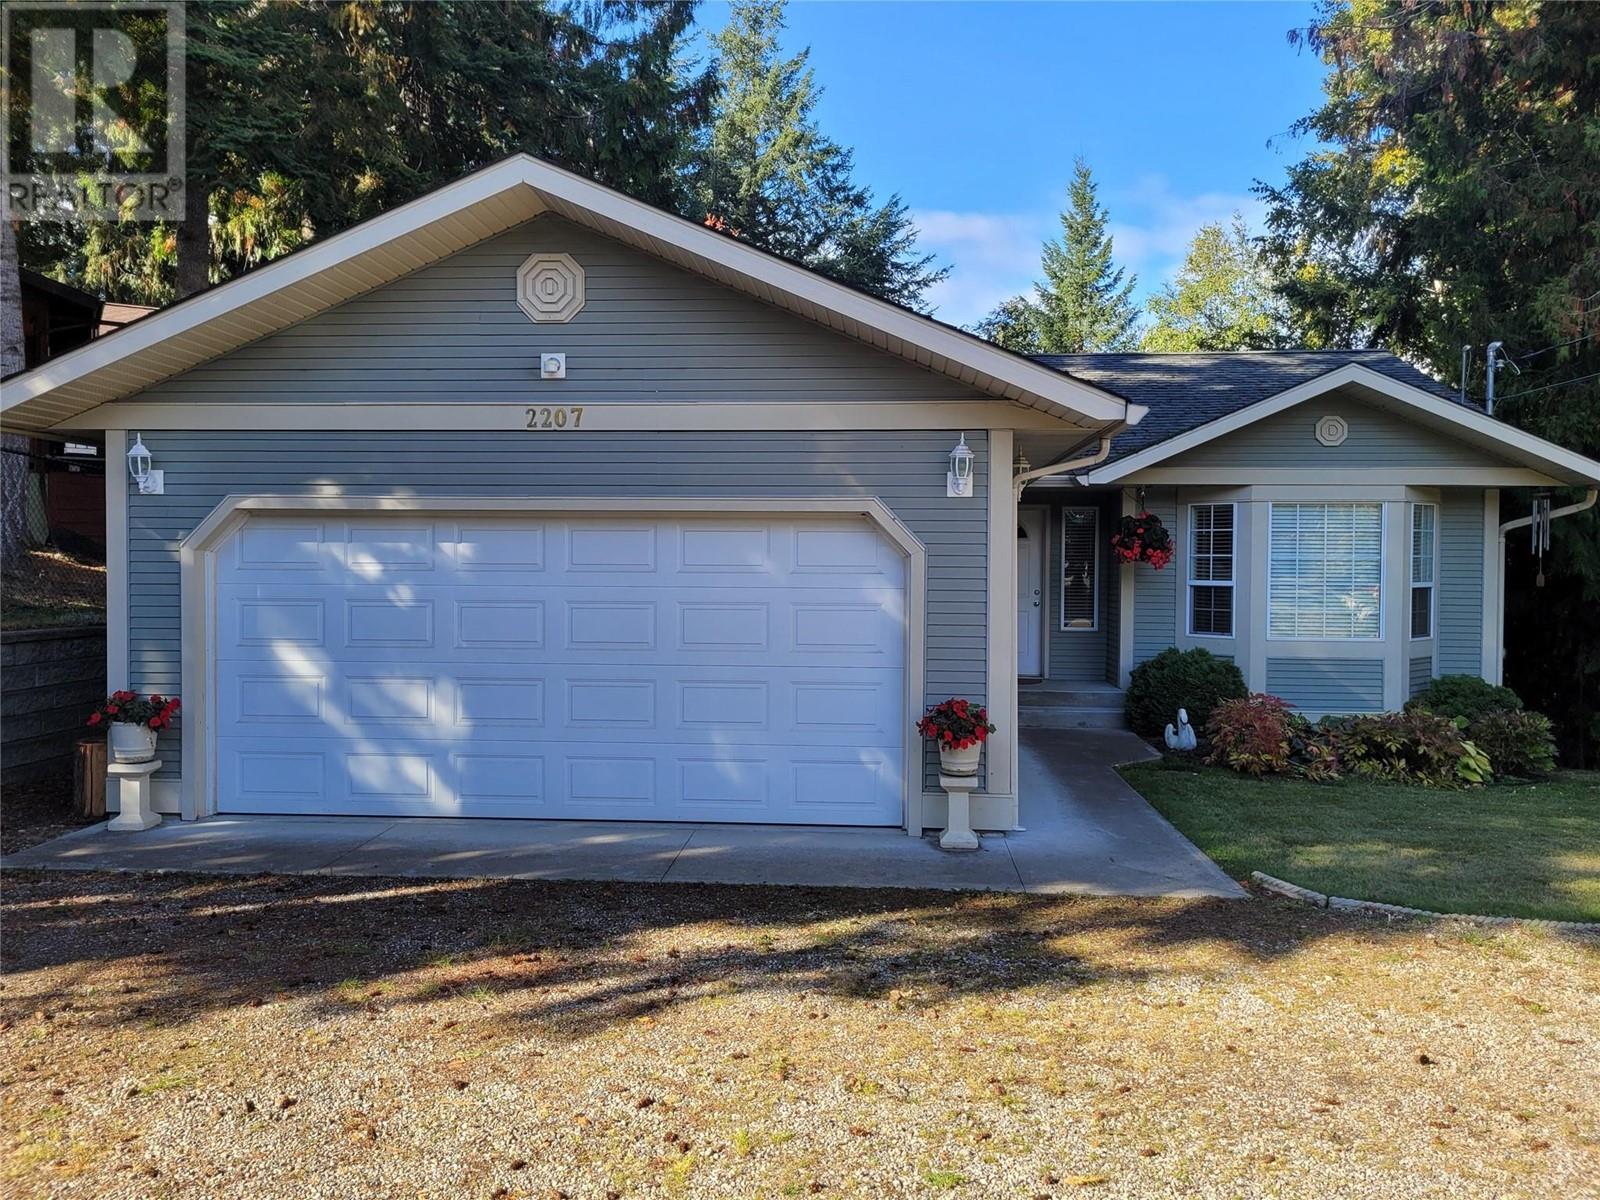  2207 Lakeview Drive, Blind Bay